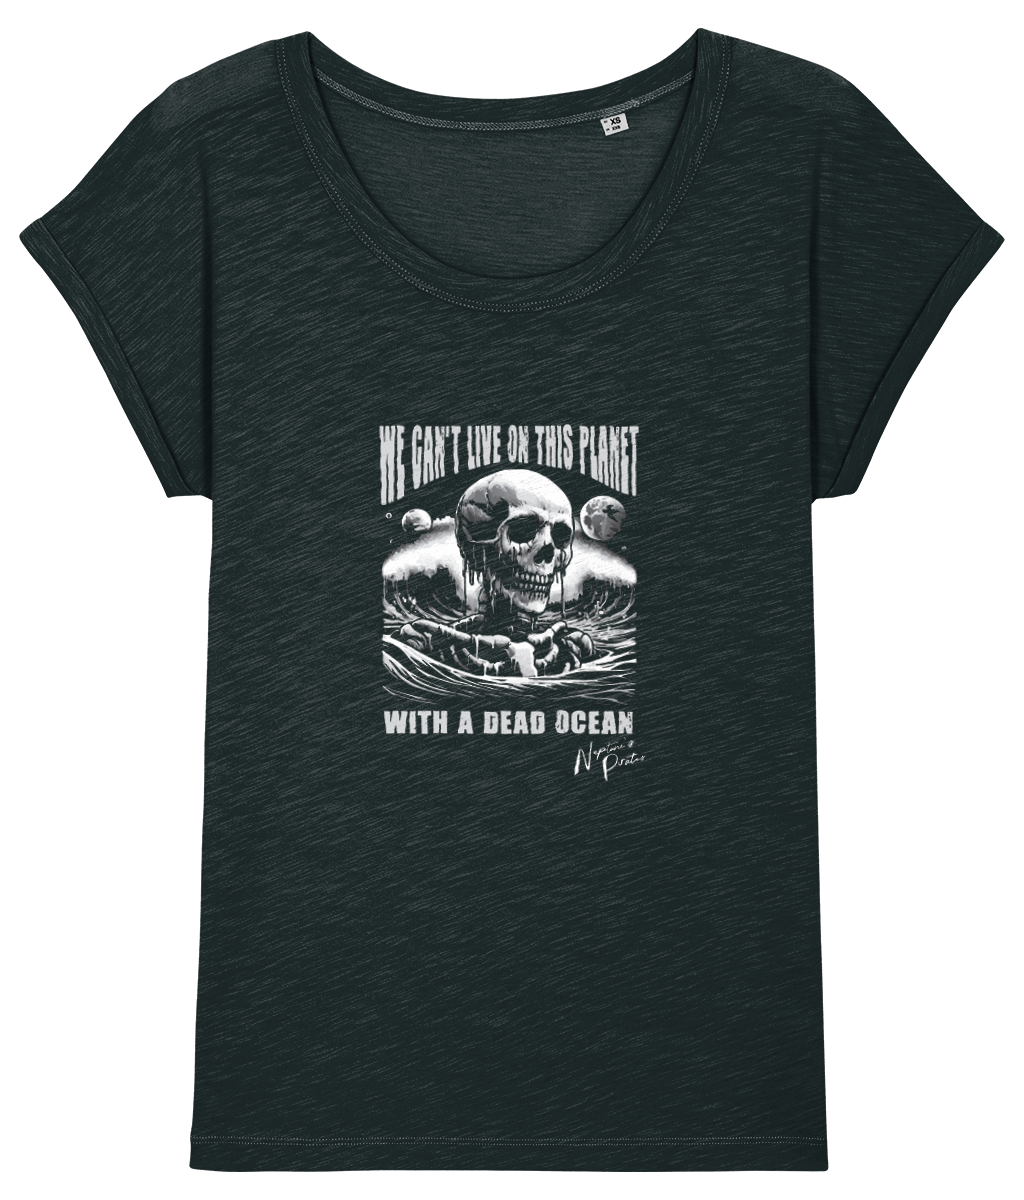 'We can't live on this planet with a dead ocean' Women's Rolled Sleeve T-Shirt